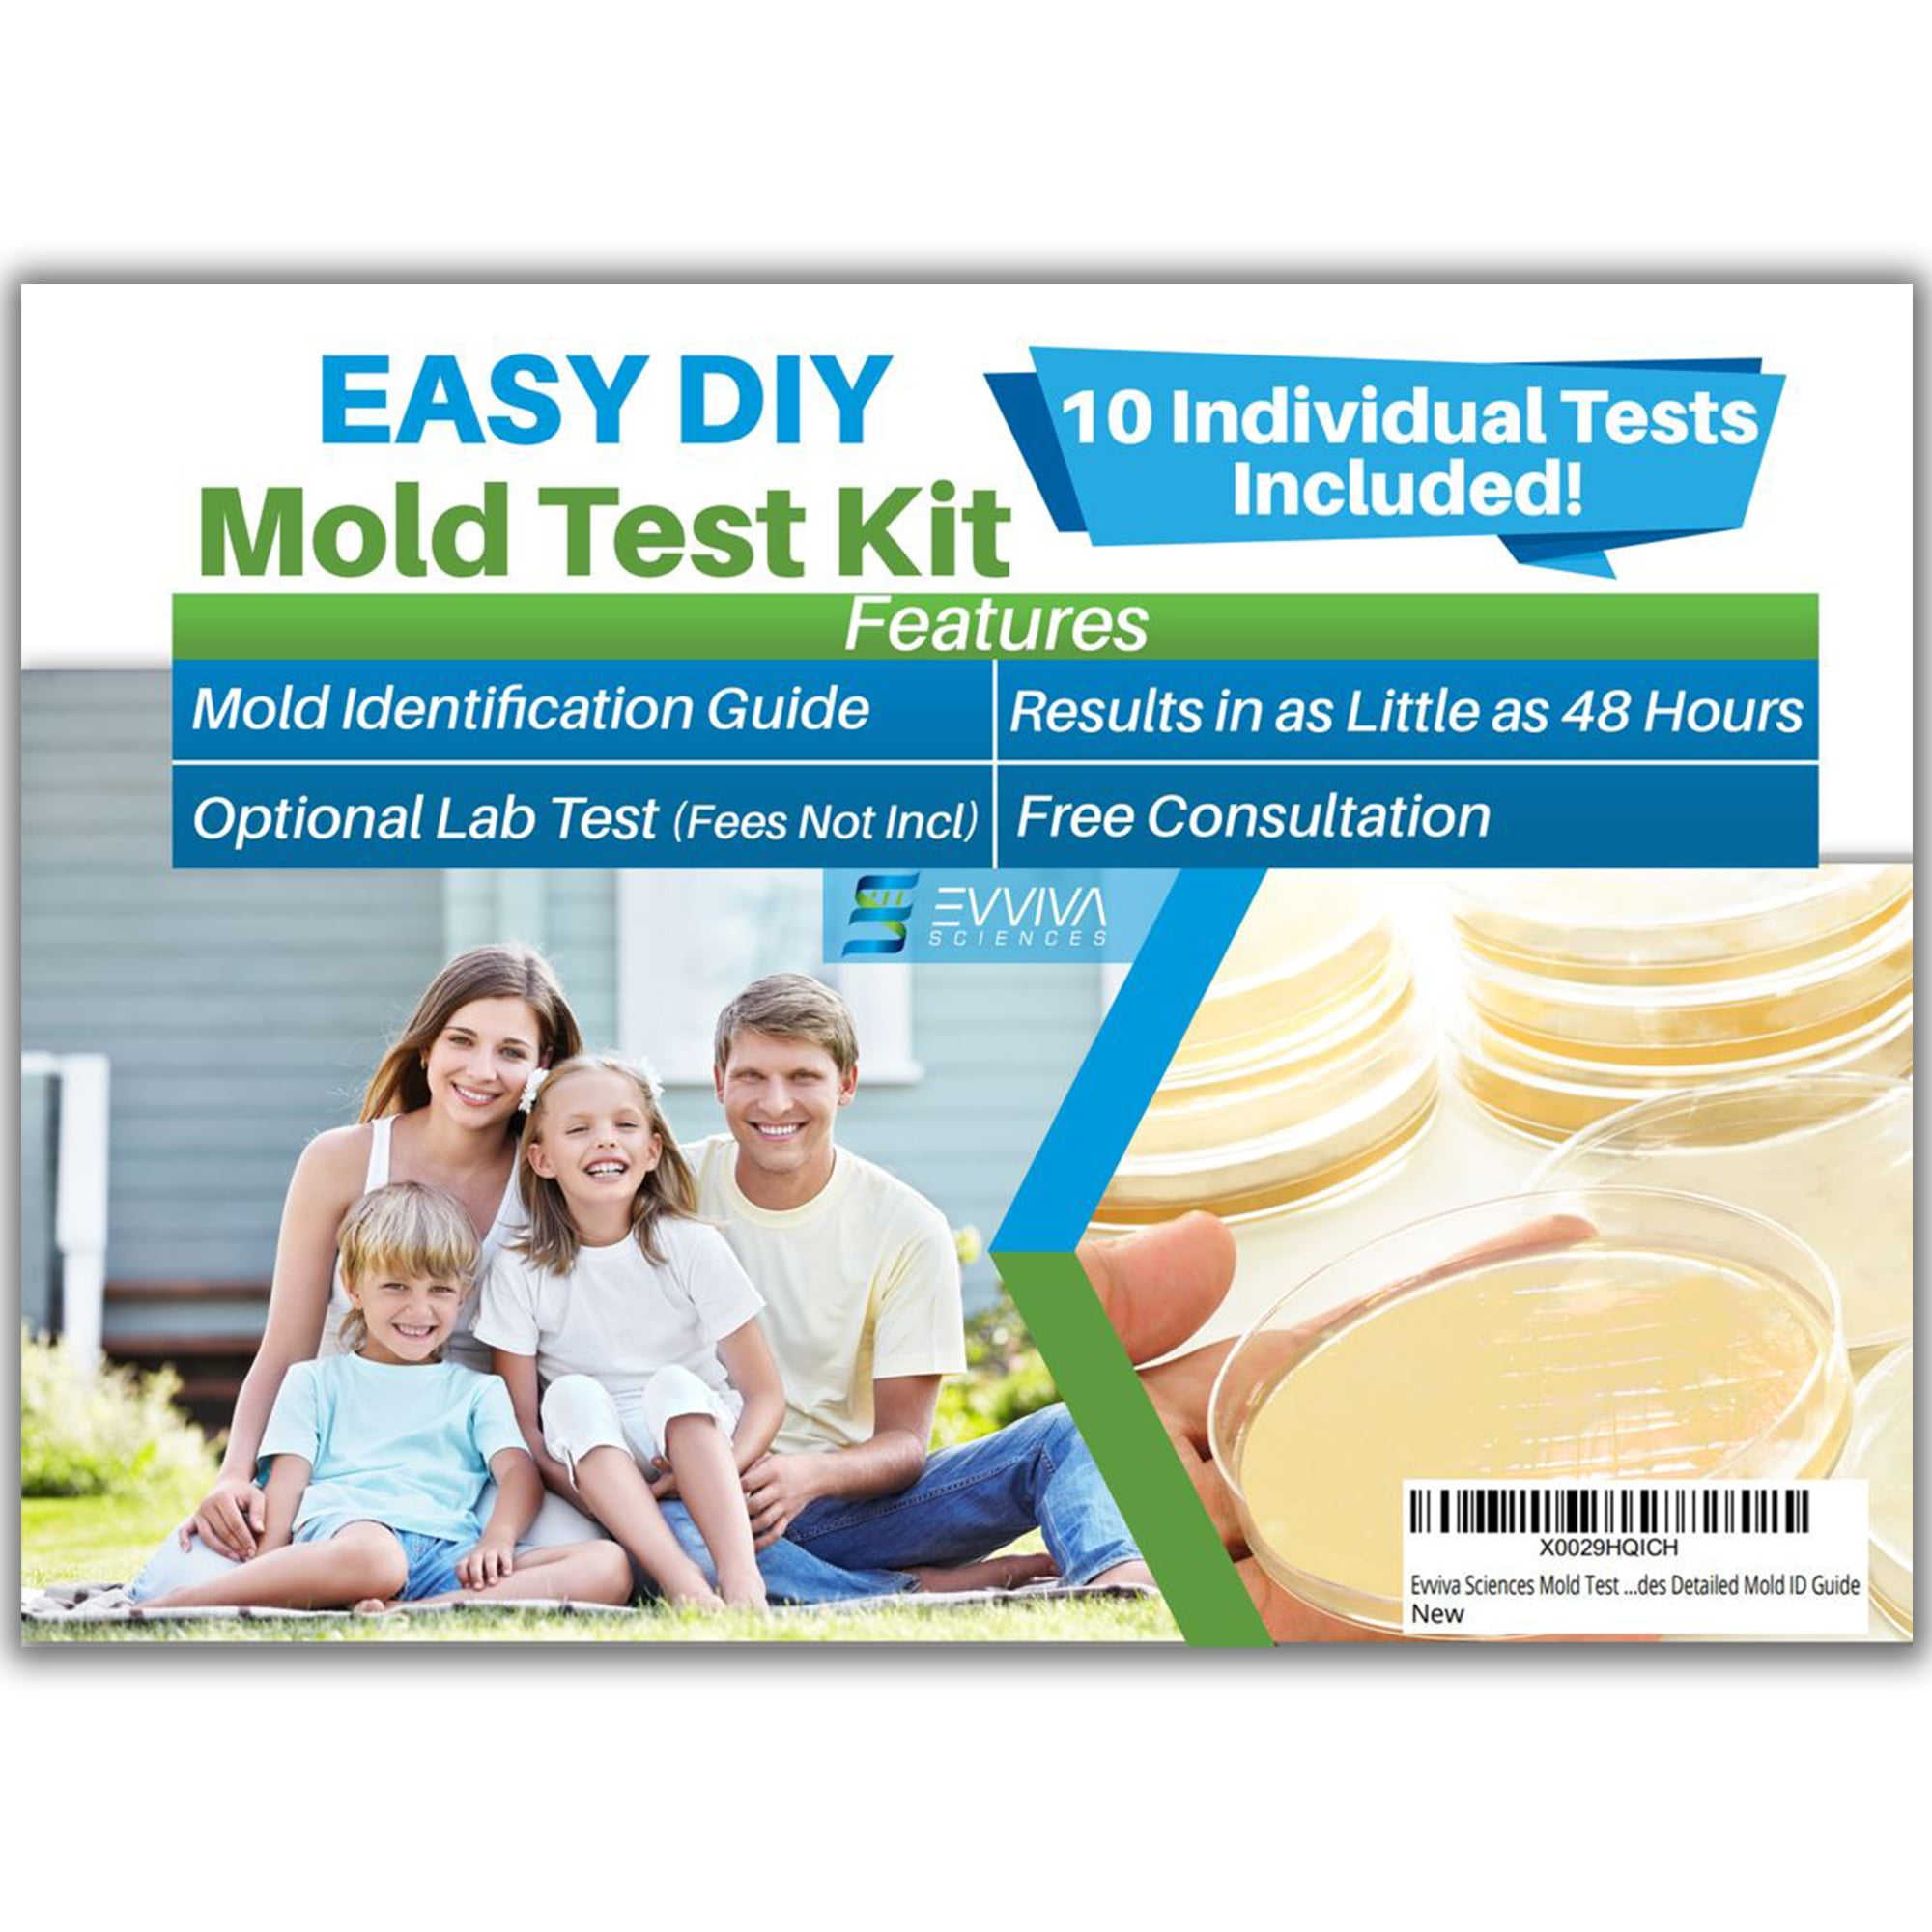 Mold Test Kits - Can I Use Home Mold Test Kits Instead of A Mold